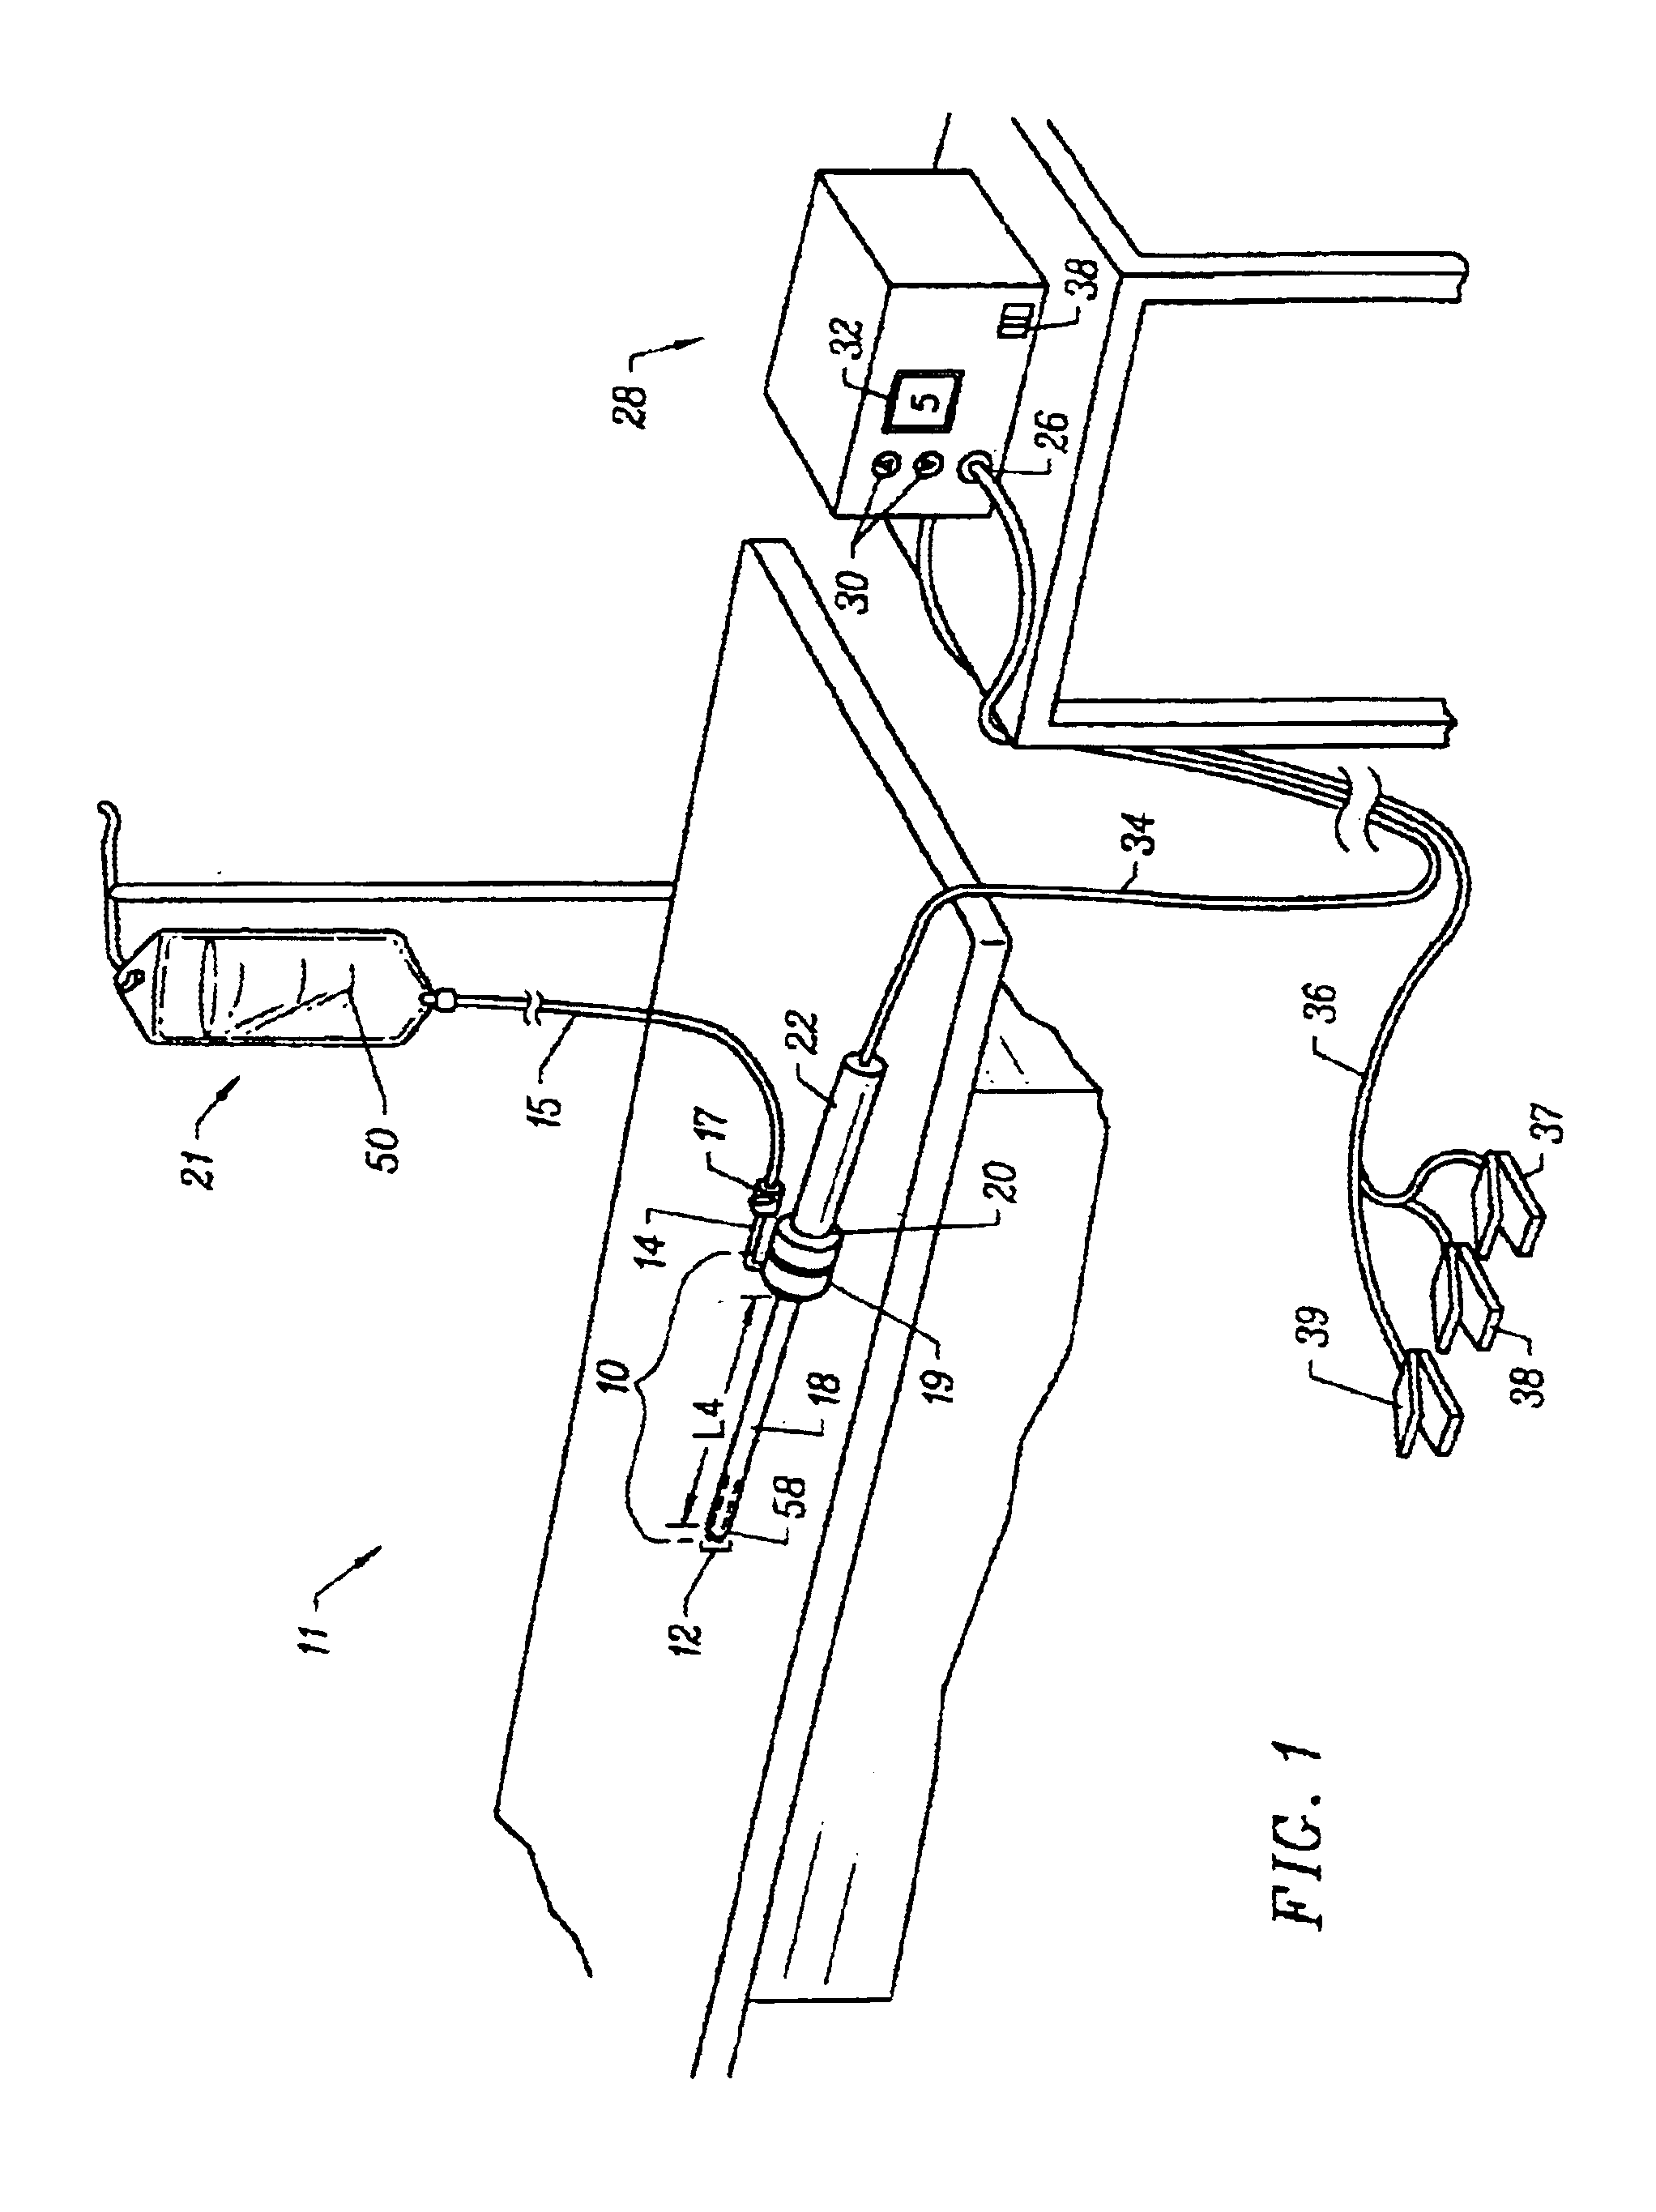 Articulated electrosurgical probe and methods